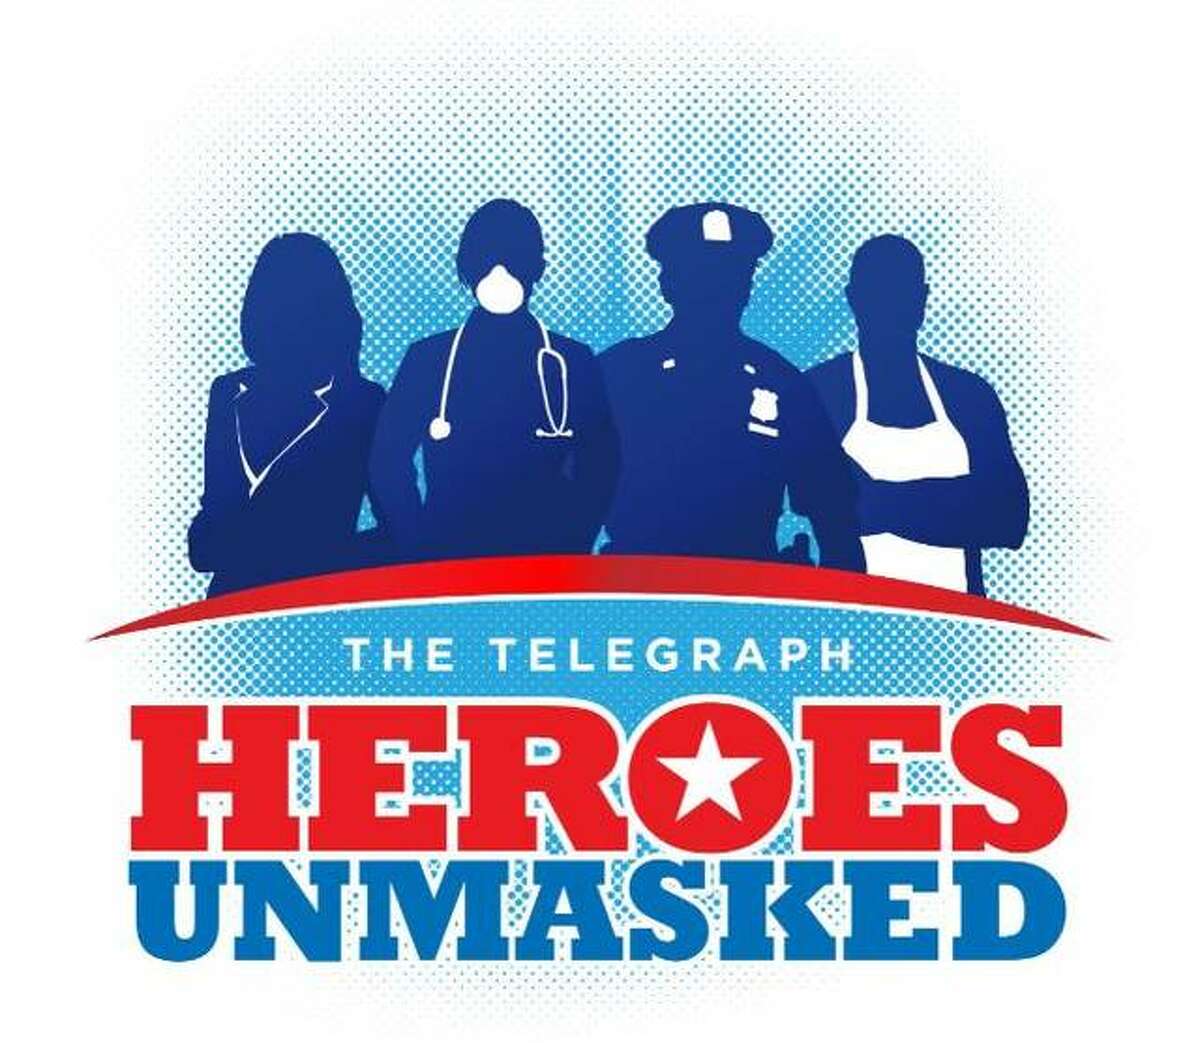 LOOKING FOR HEROES Do you know someone who’s been a community hero during the coronavirus pandemic? The Telegraph wants to shine a light on everyday people doing great things during this crisis. If you know someone, send a note and photo to news@thetelegraph.com to say who they are and what they have been doing.